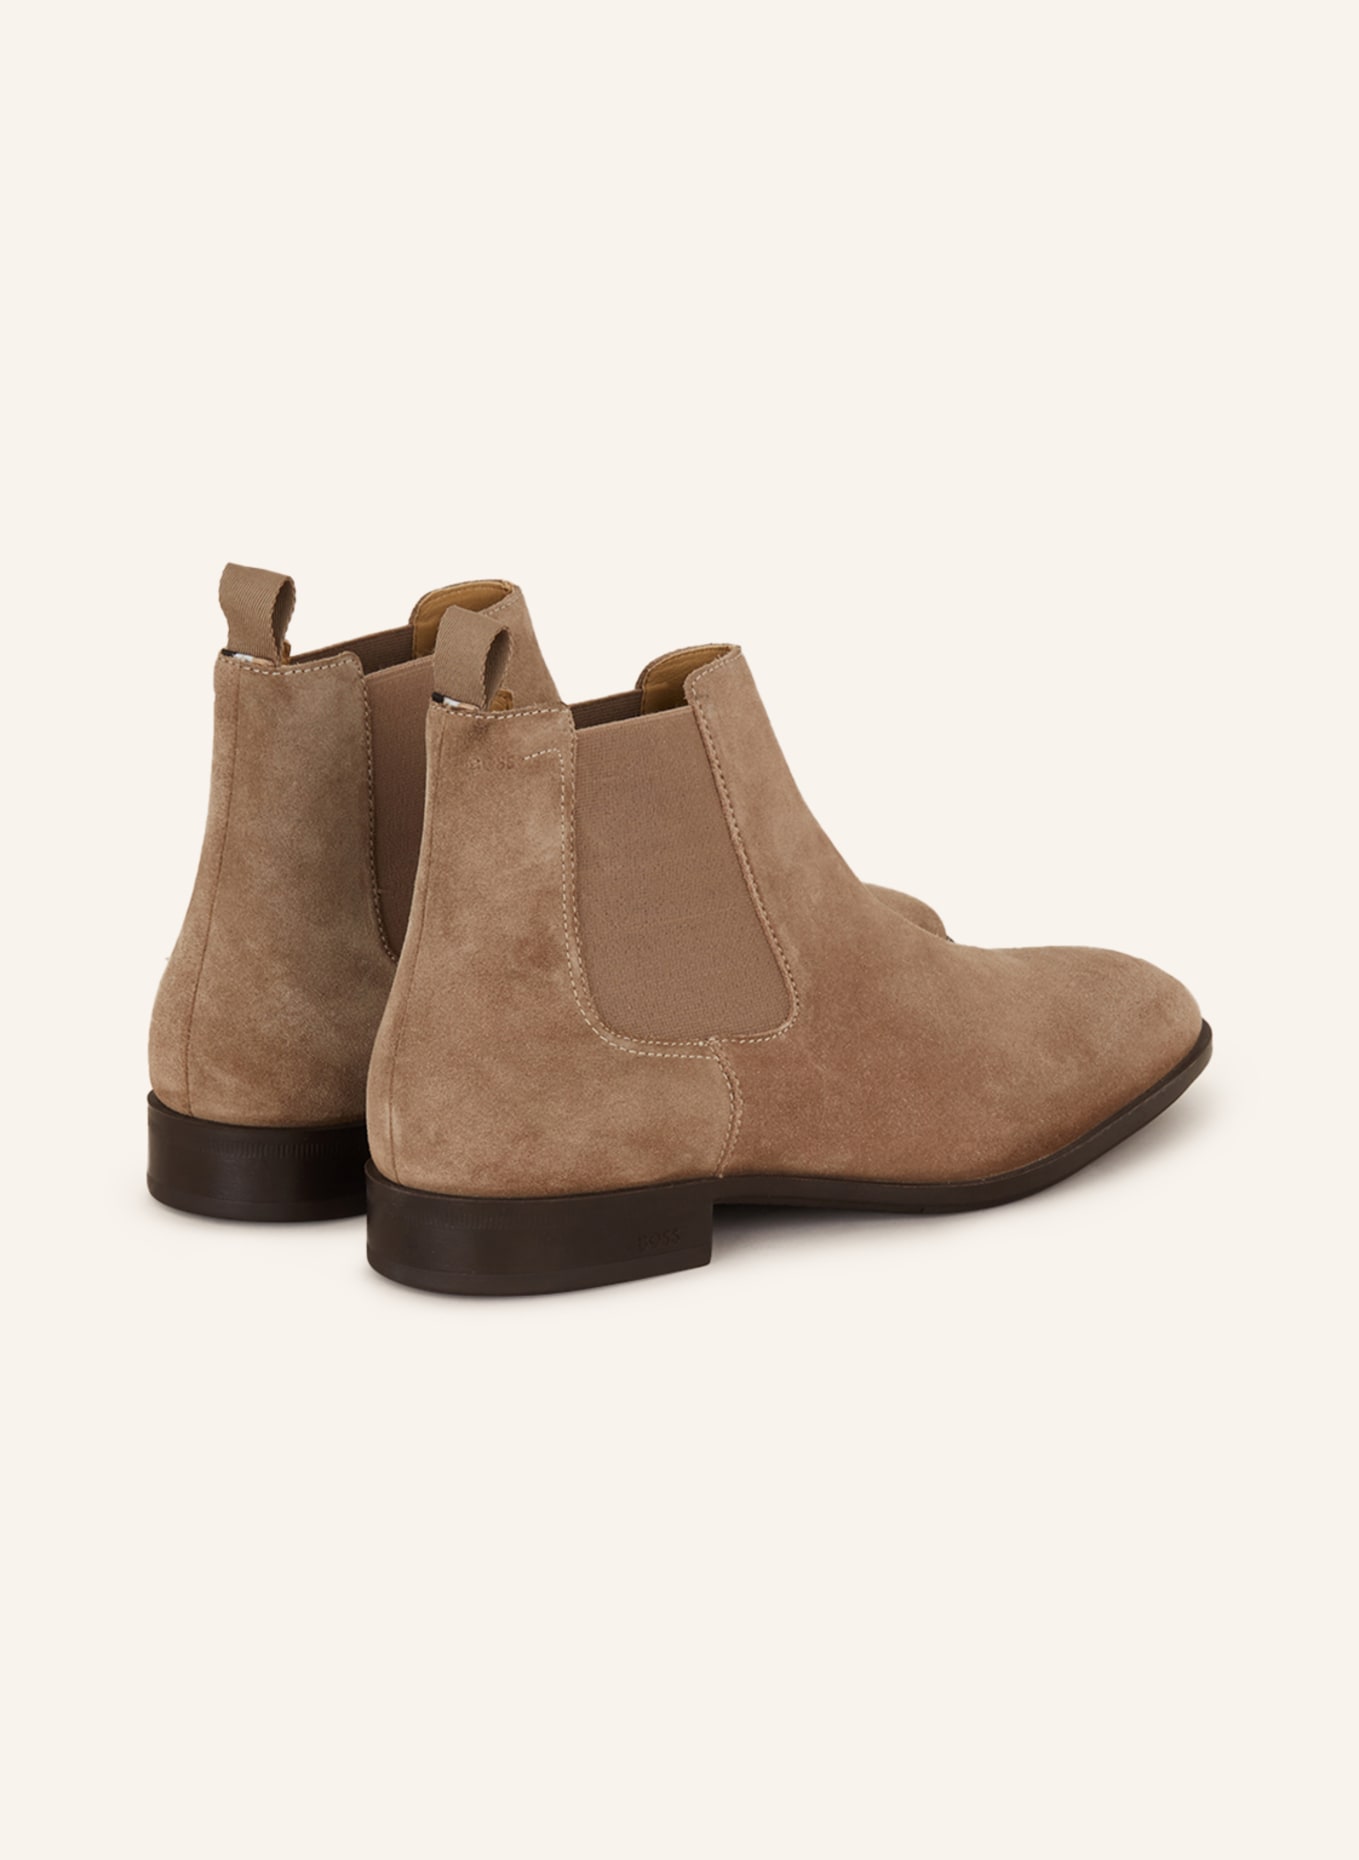 BOSS Chelsea-Boots COLBY, Farbe: BEIGE (Bild 2)